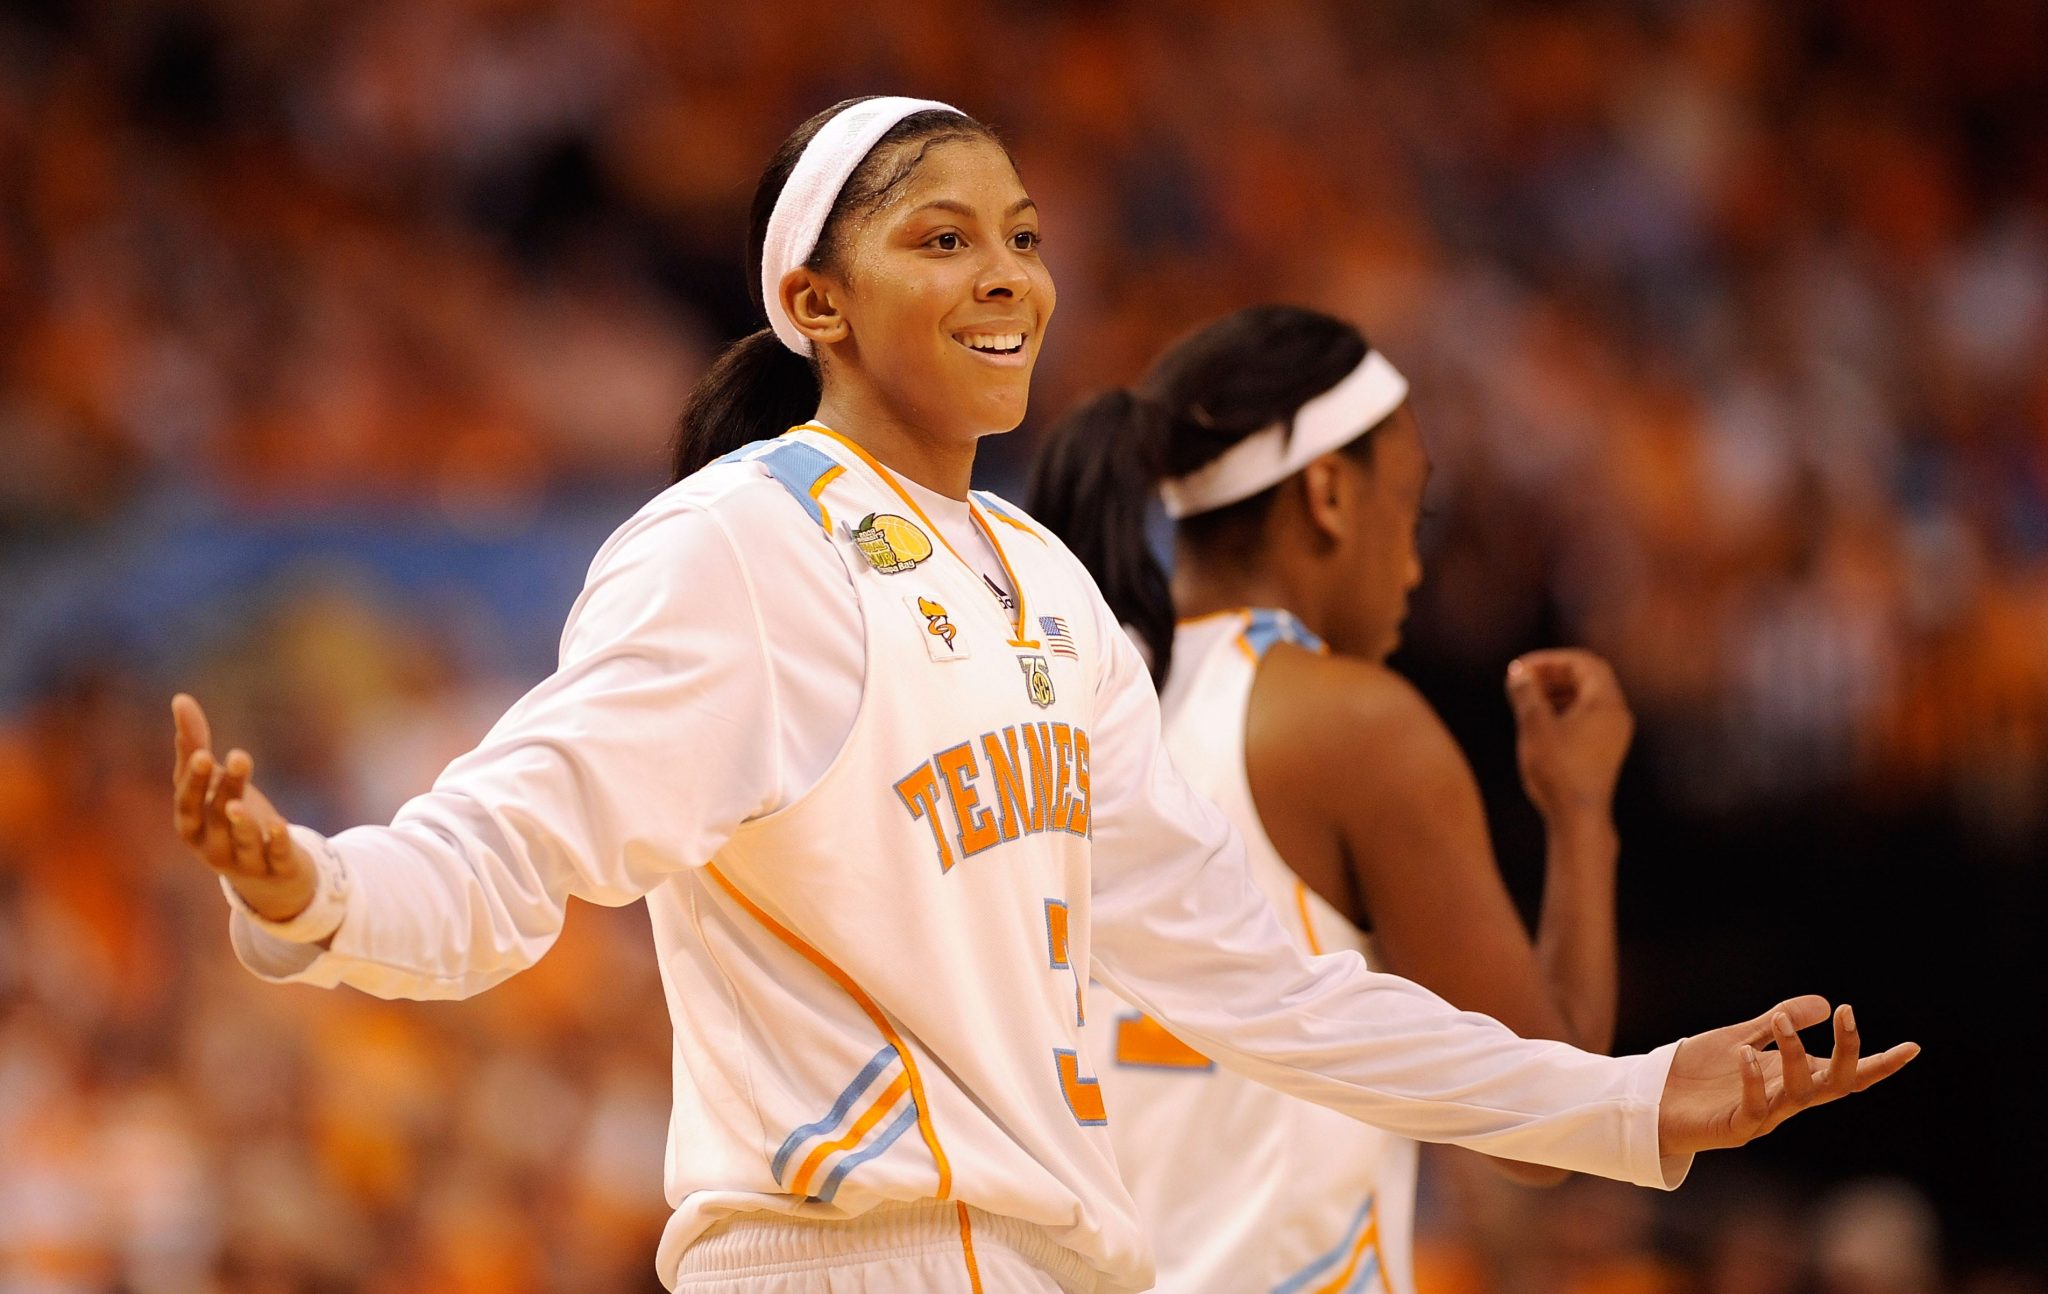 Candace Parker trolled Geno Auriemma over her dominance over his UConn